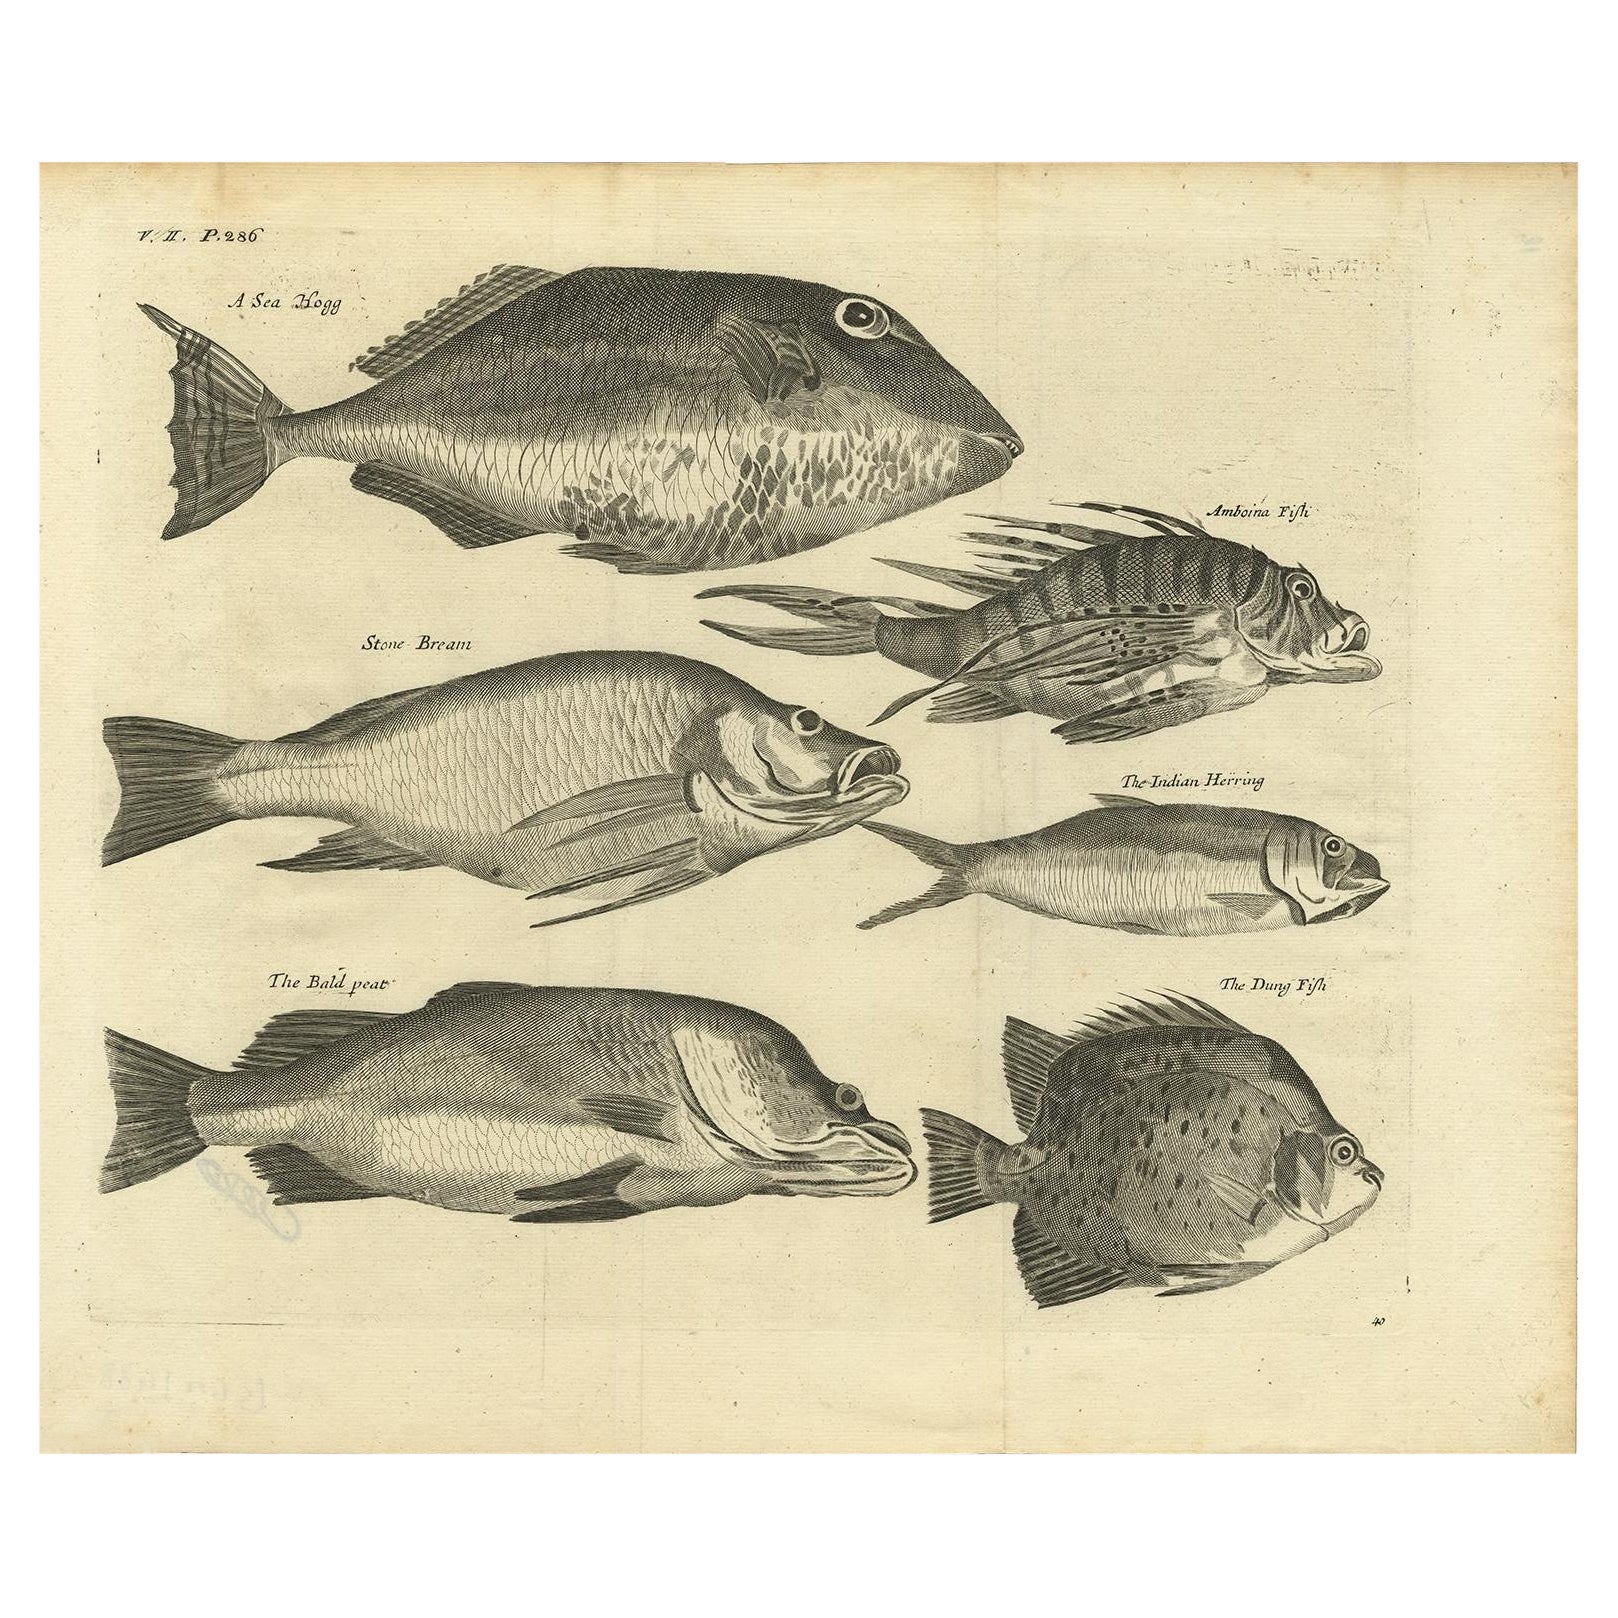 Engraving of a Sea Hogg, Amboina Fish, Stone Bream, Indian Herring Etc, Ca. 1744 For Sale